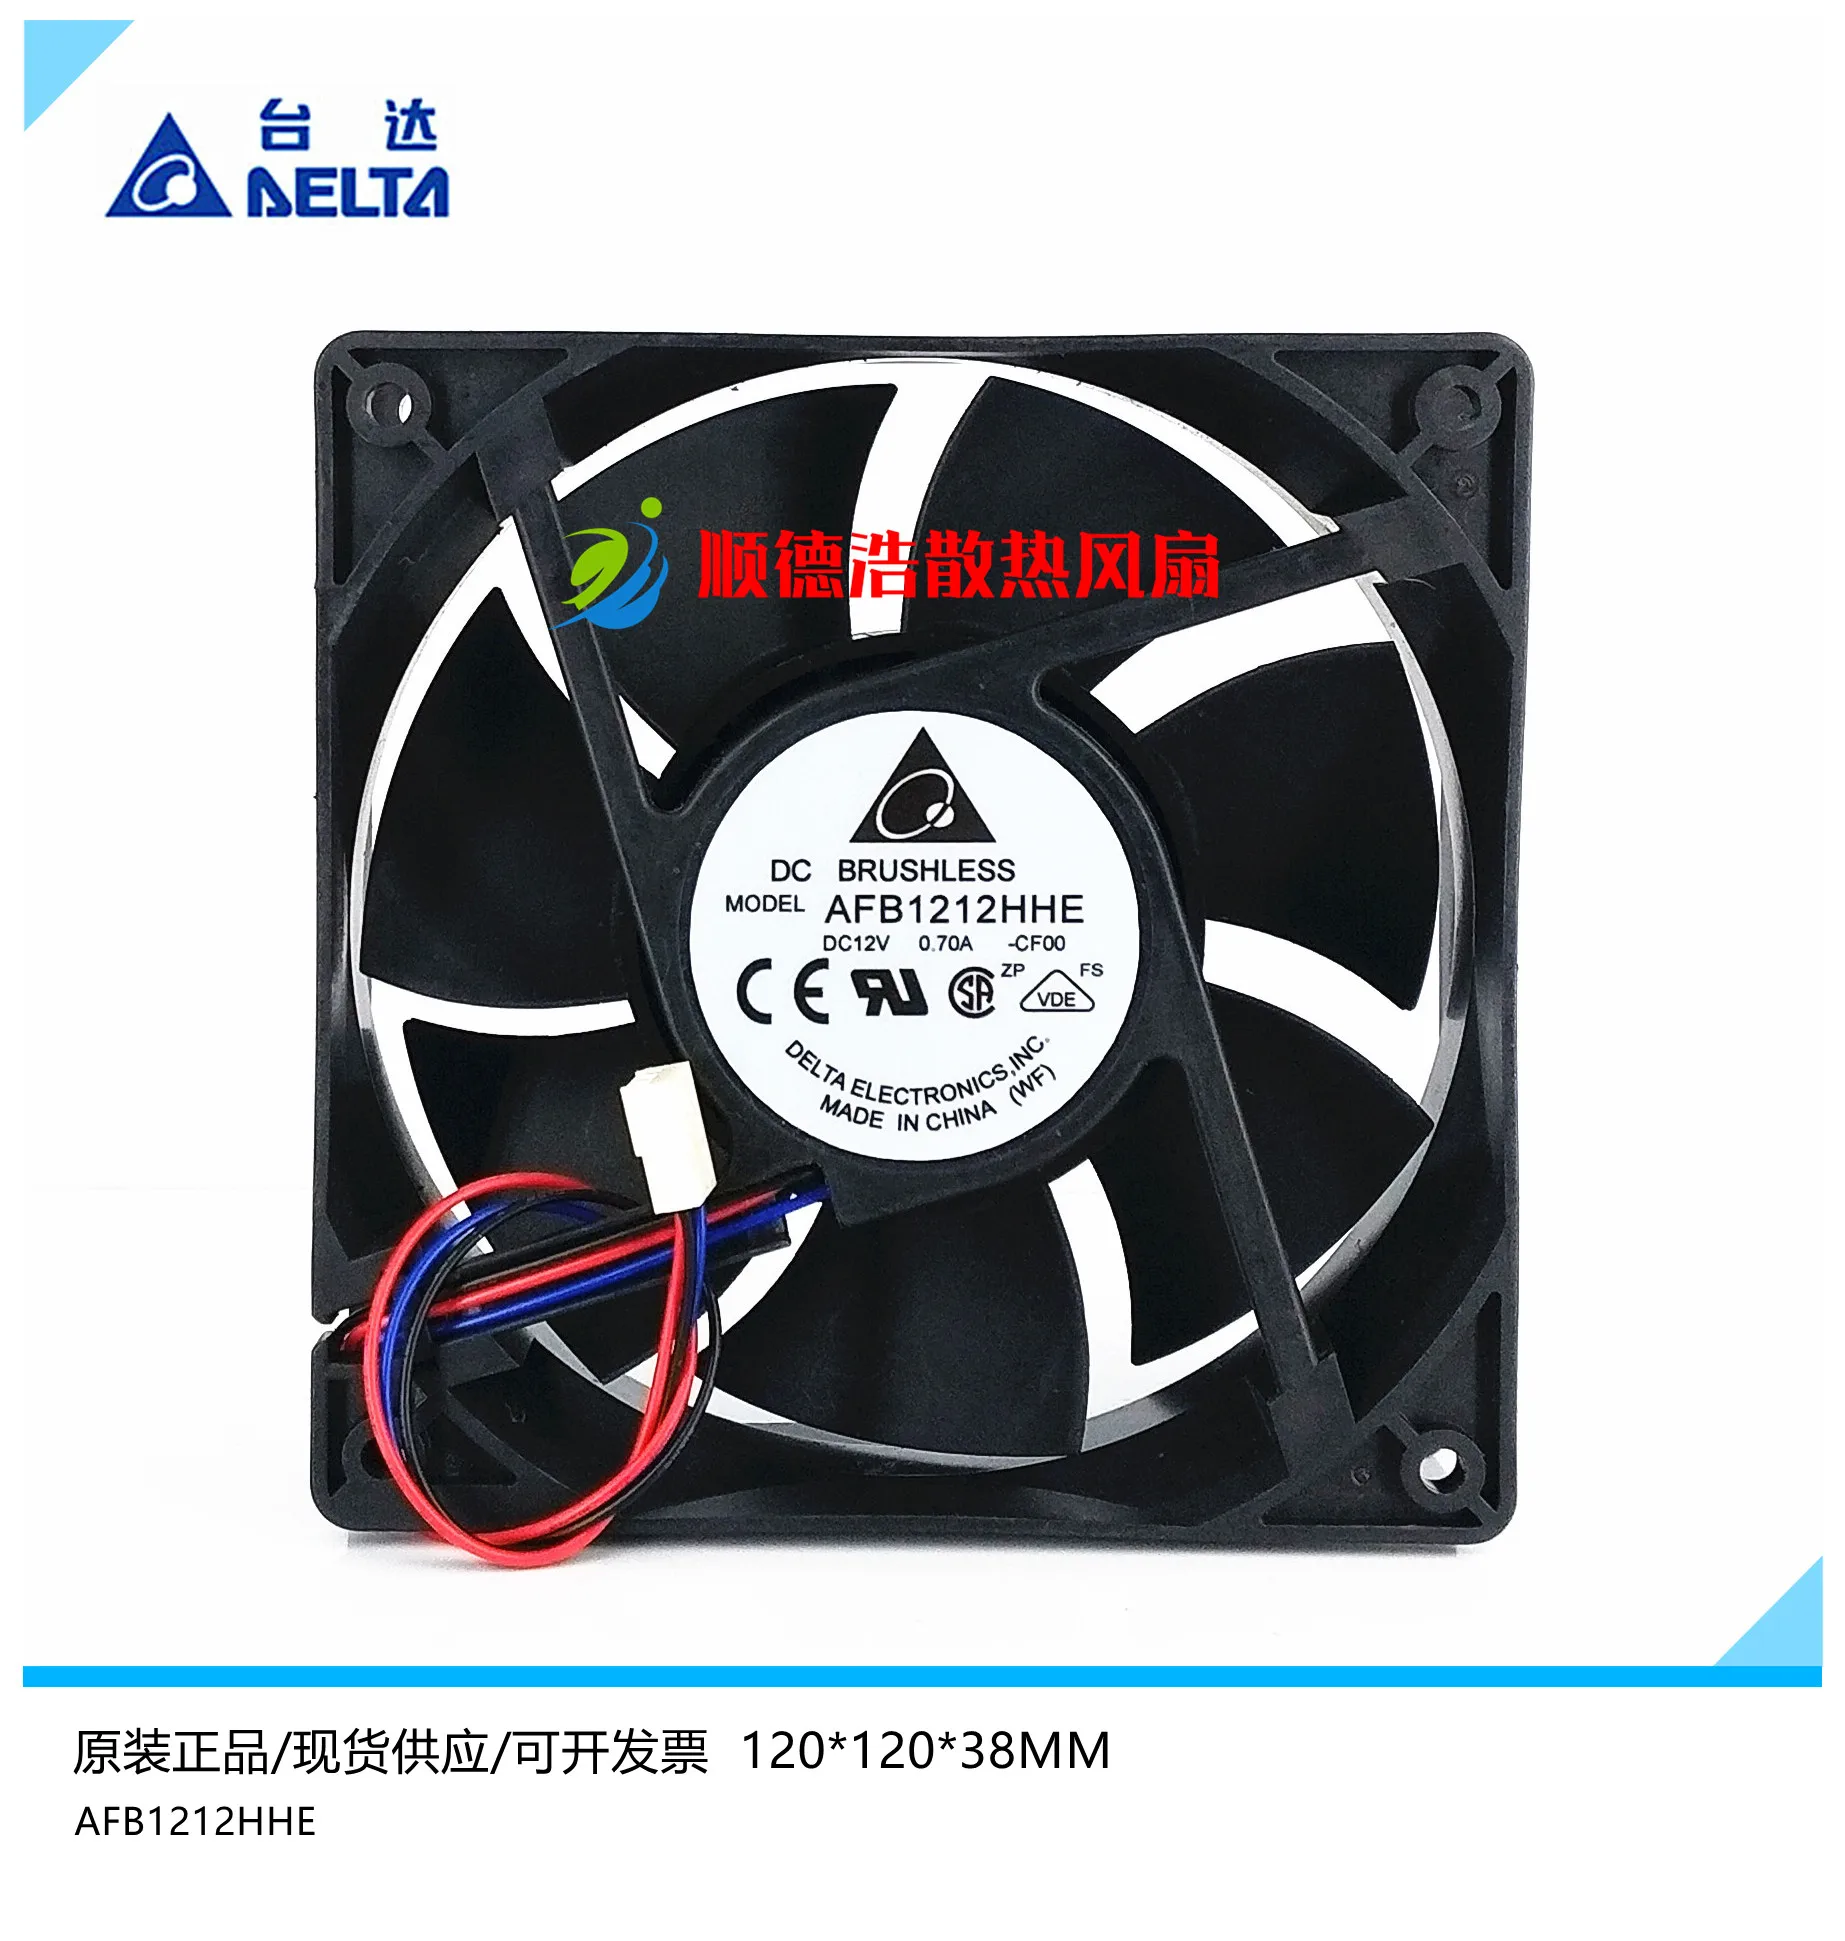 

Delta Electronics AFB1212HHE DC 12V 0.70A 120x120x38mm 3-Wire Server Cooling Fan